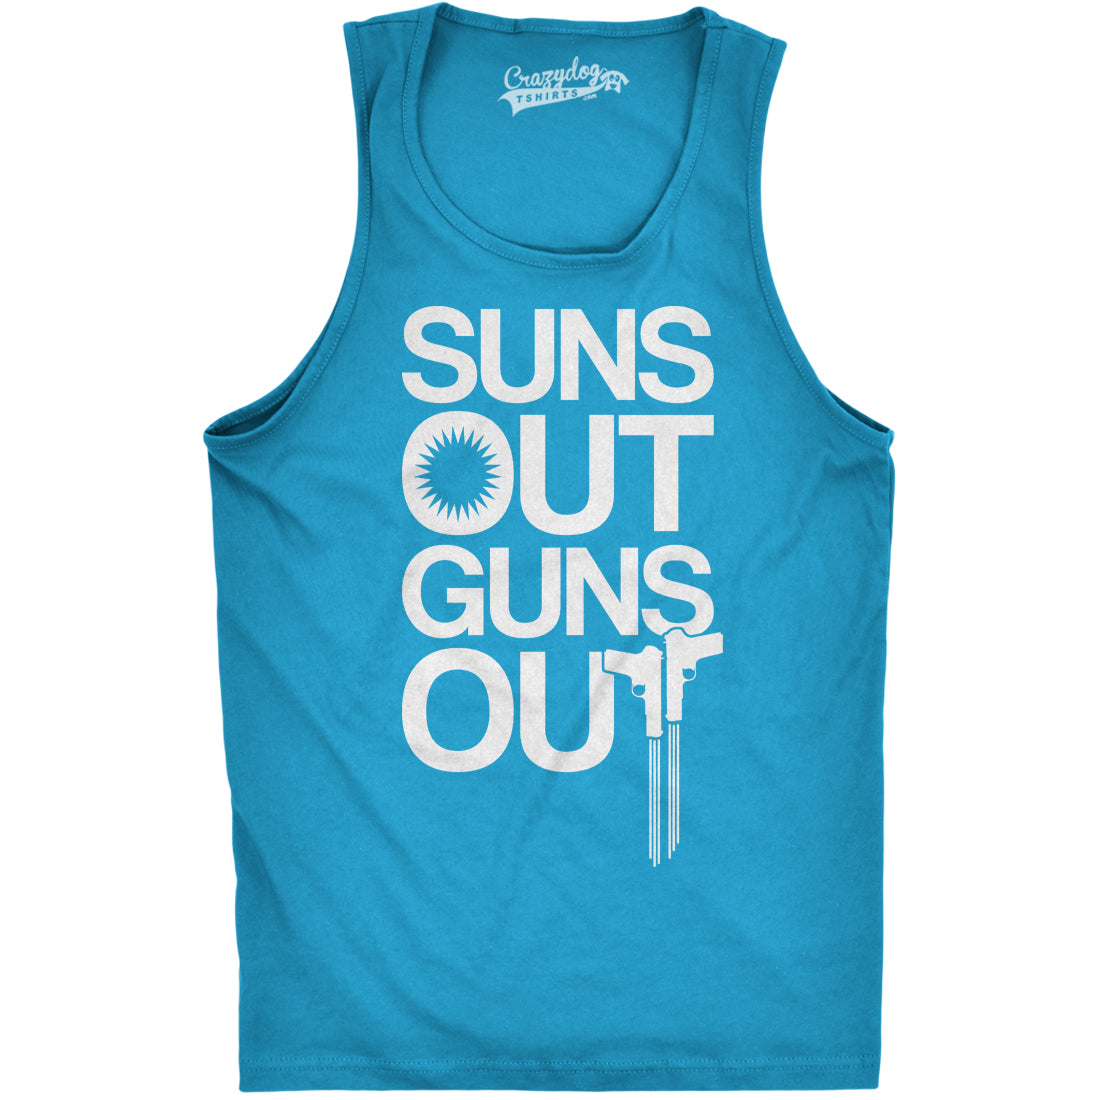 Funny Turquoise Suns Out Guns Out Mens Tank Top Nerdy Fitness Tee